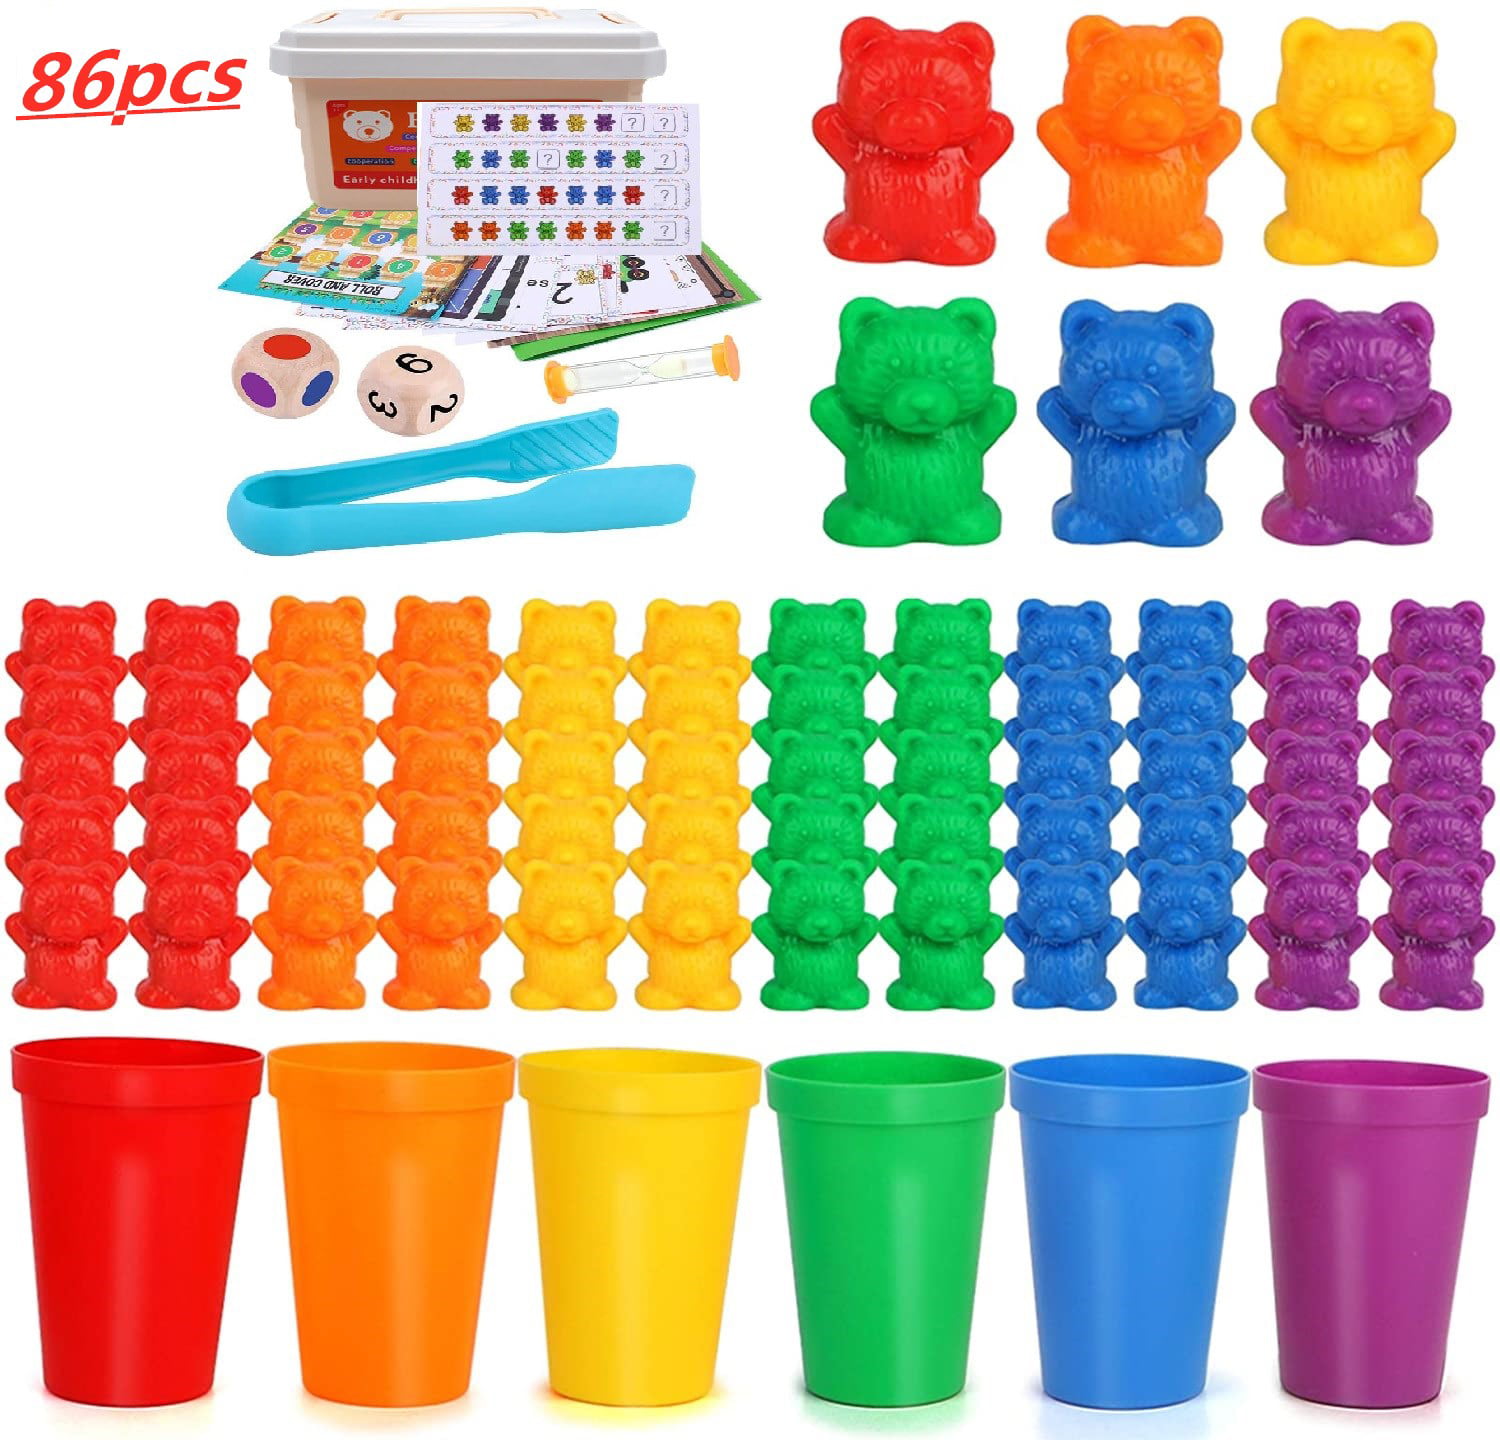 90x Counting Sorting Bears Educational Set Sort Game w/ Rainbow Cups Gifts 